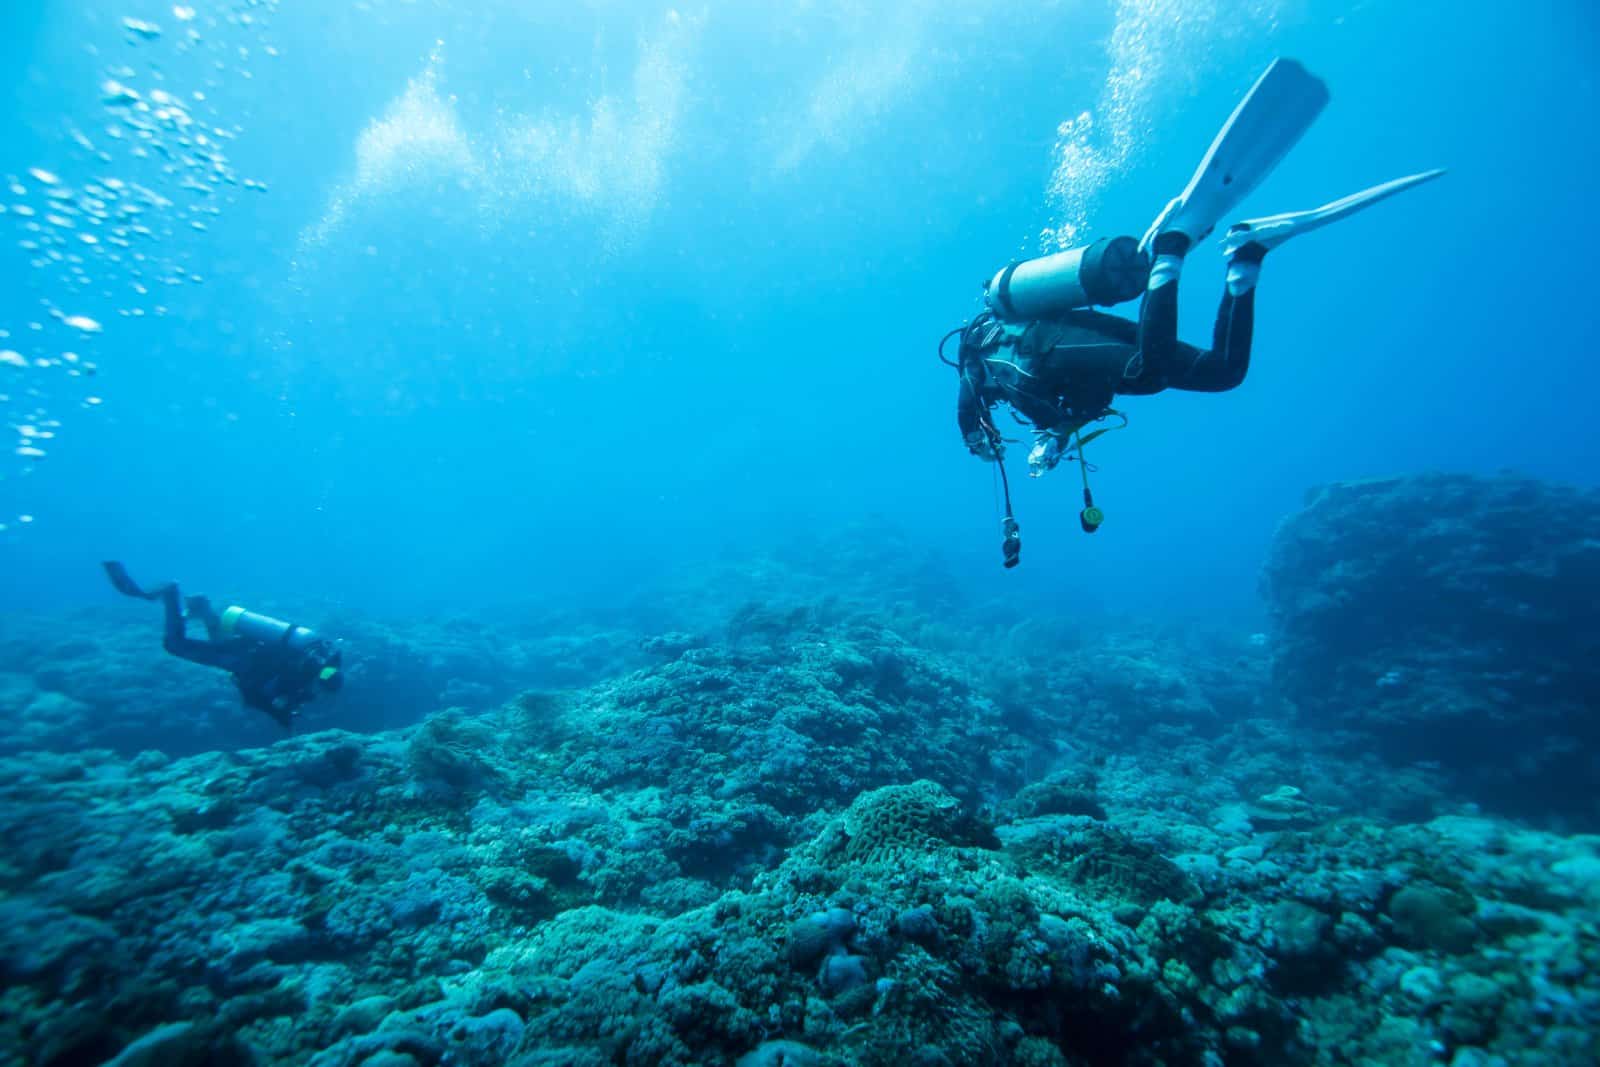 <p class="wp-caption-text">Image Credit: Shutterstock / littlesam</p>  <p><span>The PADI Advanced Open Water Diver course improves your diving skills and confidence while introducing you to new activities and ways to have fun scuba diving. You’ll try out different specialties while gaining experience under the supervision of your PADI Instructor. The course includes five adventure dives, with the Deep and Underwater Navigation dives being mandatory.</span></p> <p><span>You can choose the remaining three dives from various options such as Peak Performance Buoyancy, Night Diver, Wreck Diver, and more. This course can be taken immediately after completing the Open Water Diver certification and is structured to be flexible and performance-based, requiring no formal classroom session.</span></p> <p><b>Insider’s Tip:</b><span> To get the most out of your Advanced Open Water Diver course, select adventure dives that interest you and challenge you to develop new skills. Consider the local diving conditions and available dive sites to make choices that enhance your diving repertoire. For example, if you’re diving in an area known for its wrecks, the Wreck Diver specialty can provide a fascinating and educational experience.</span></p>